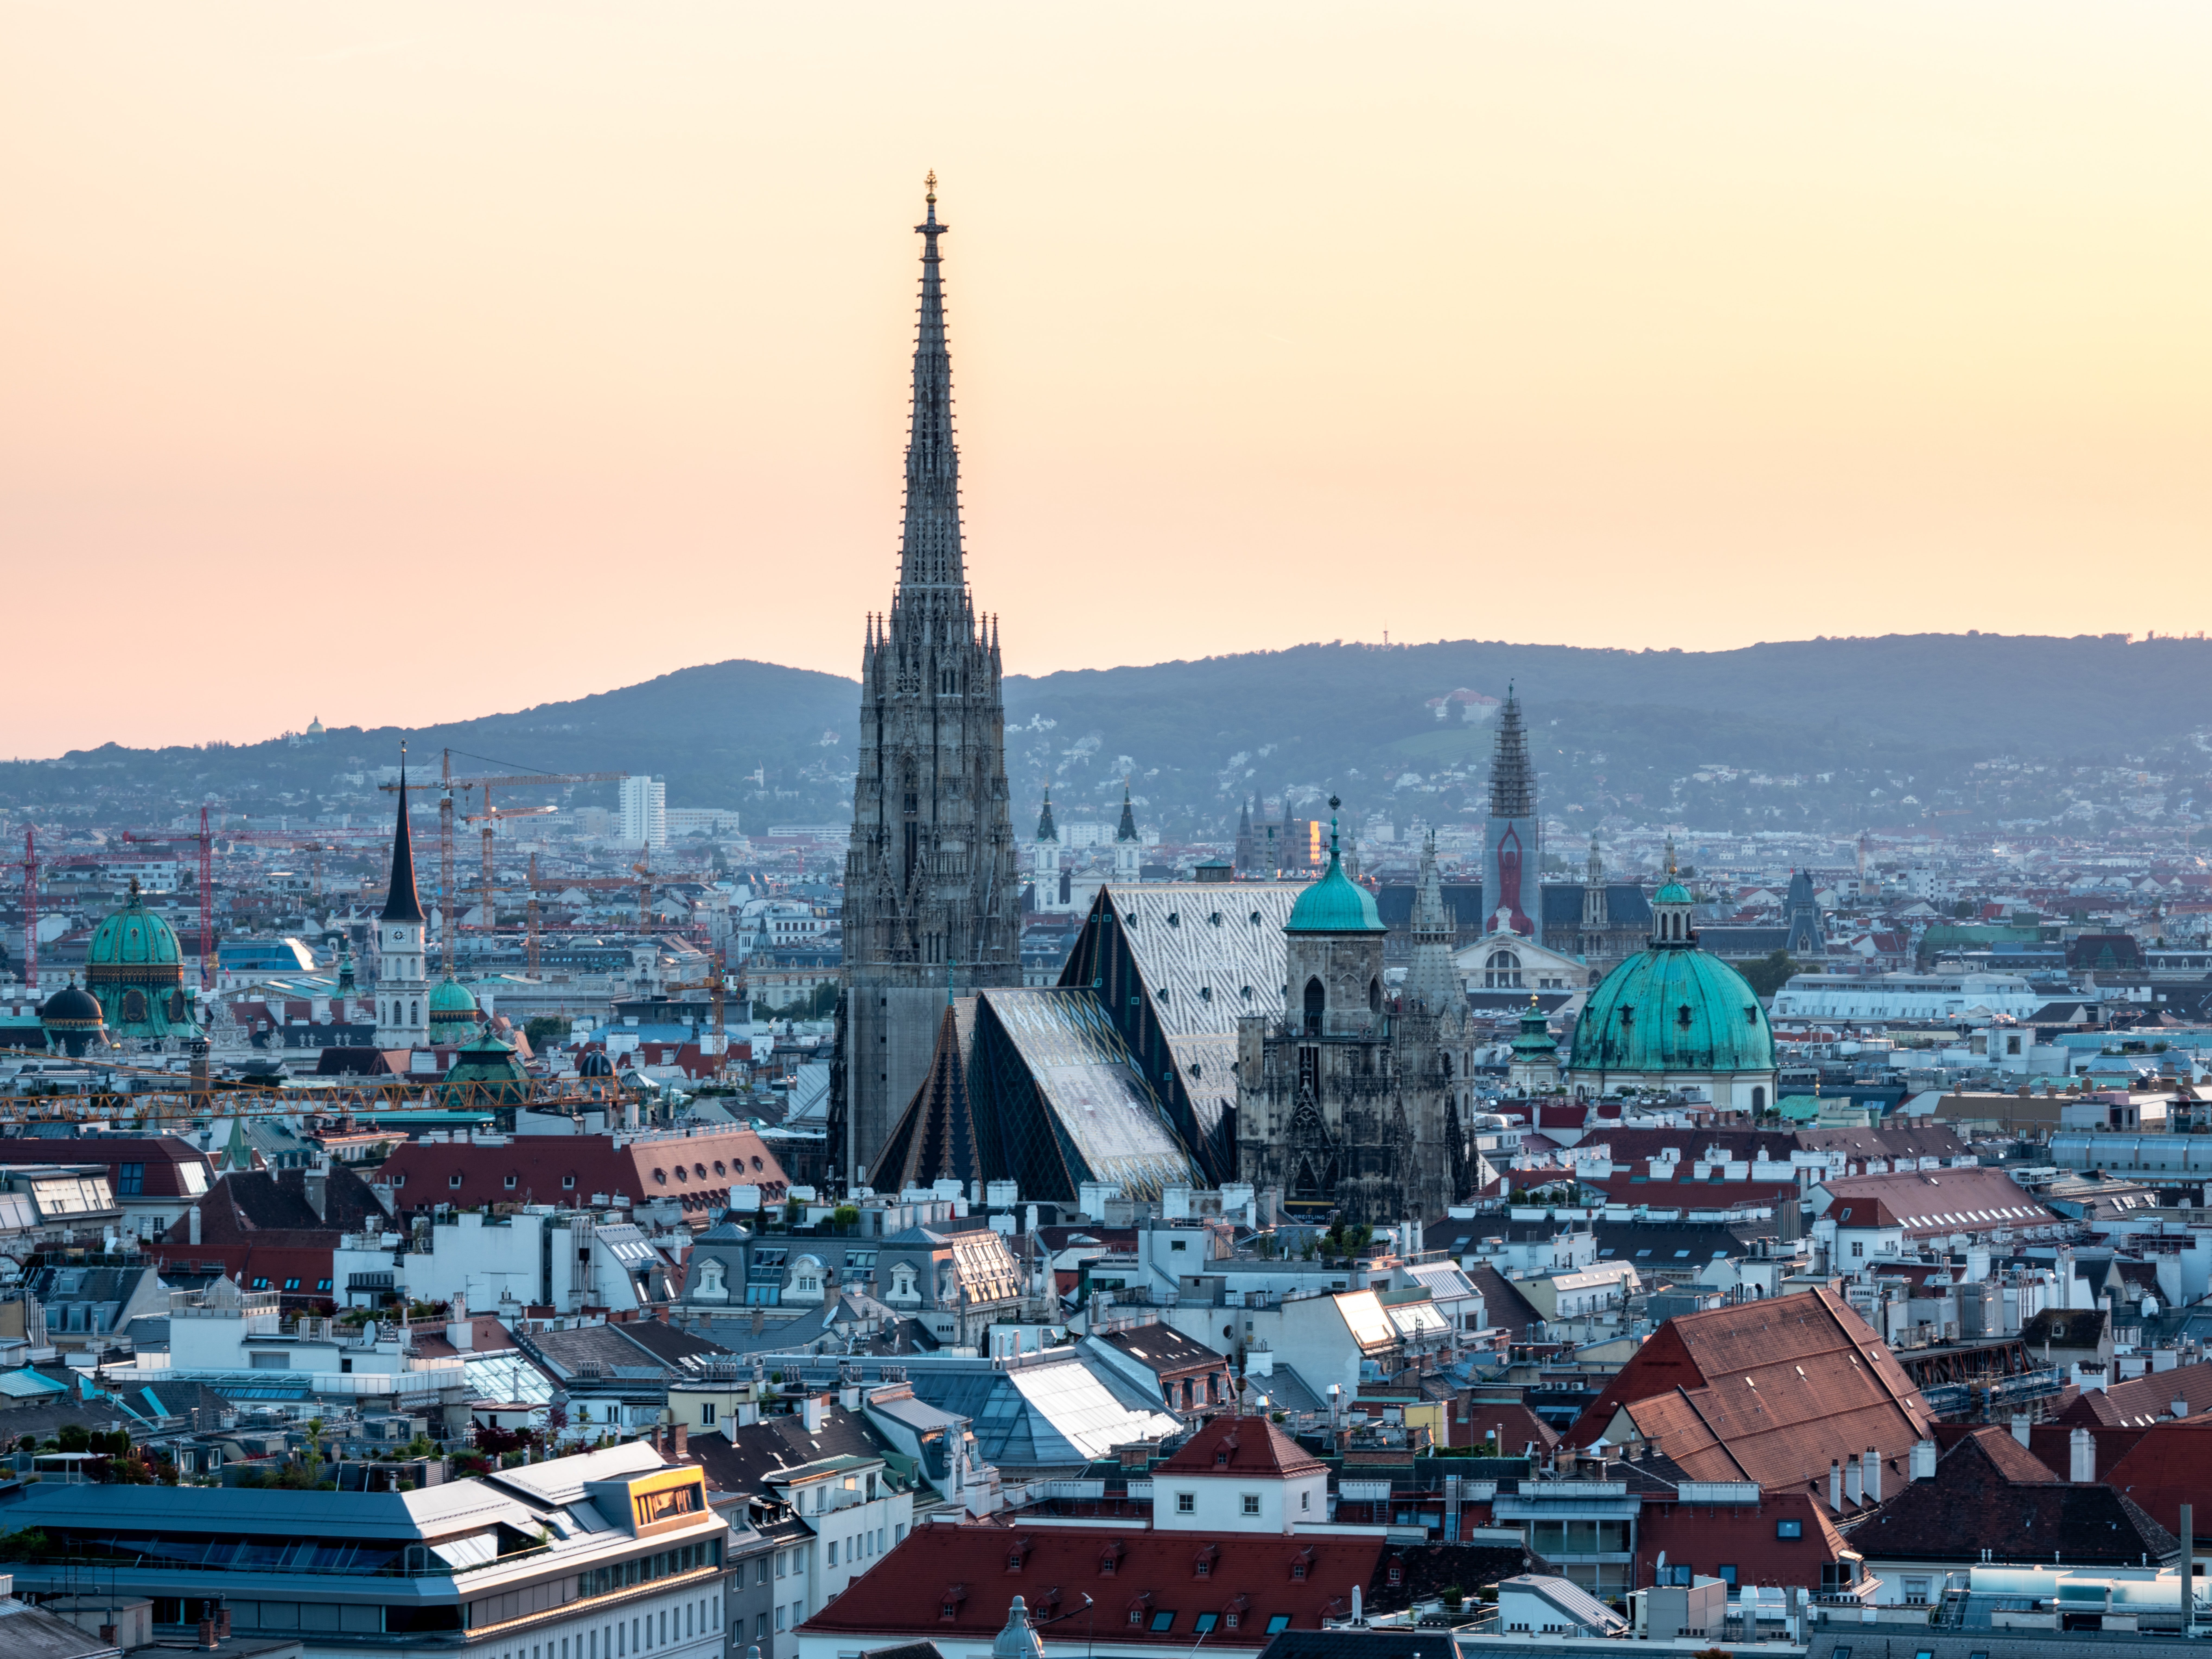 EXPLAINED: What is Austria’s church tax and how do I avoid paying it?